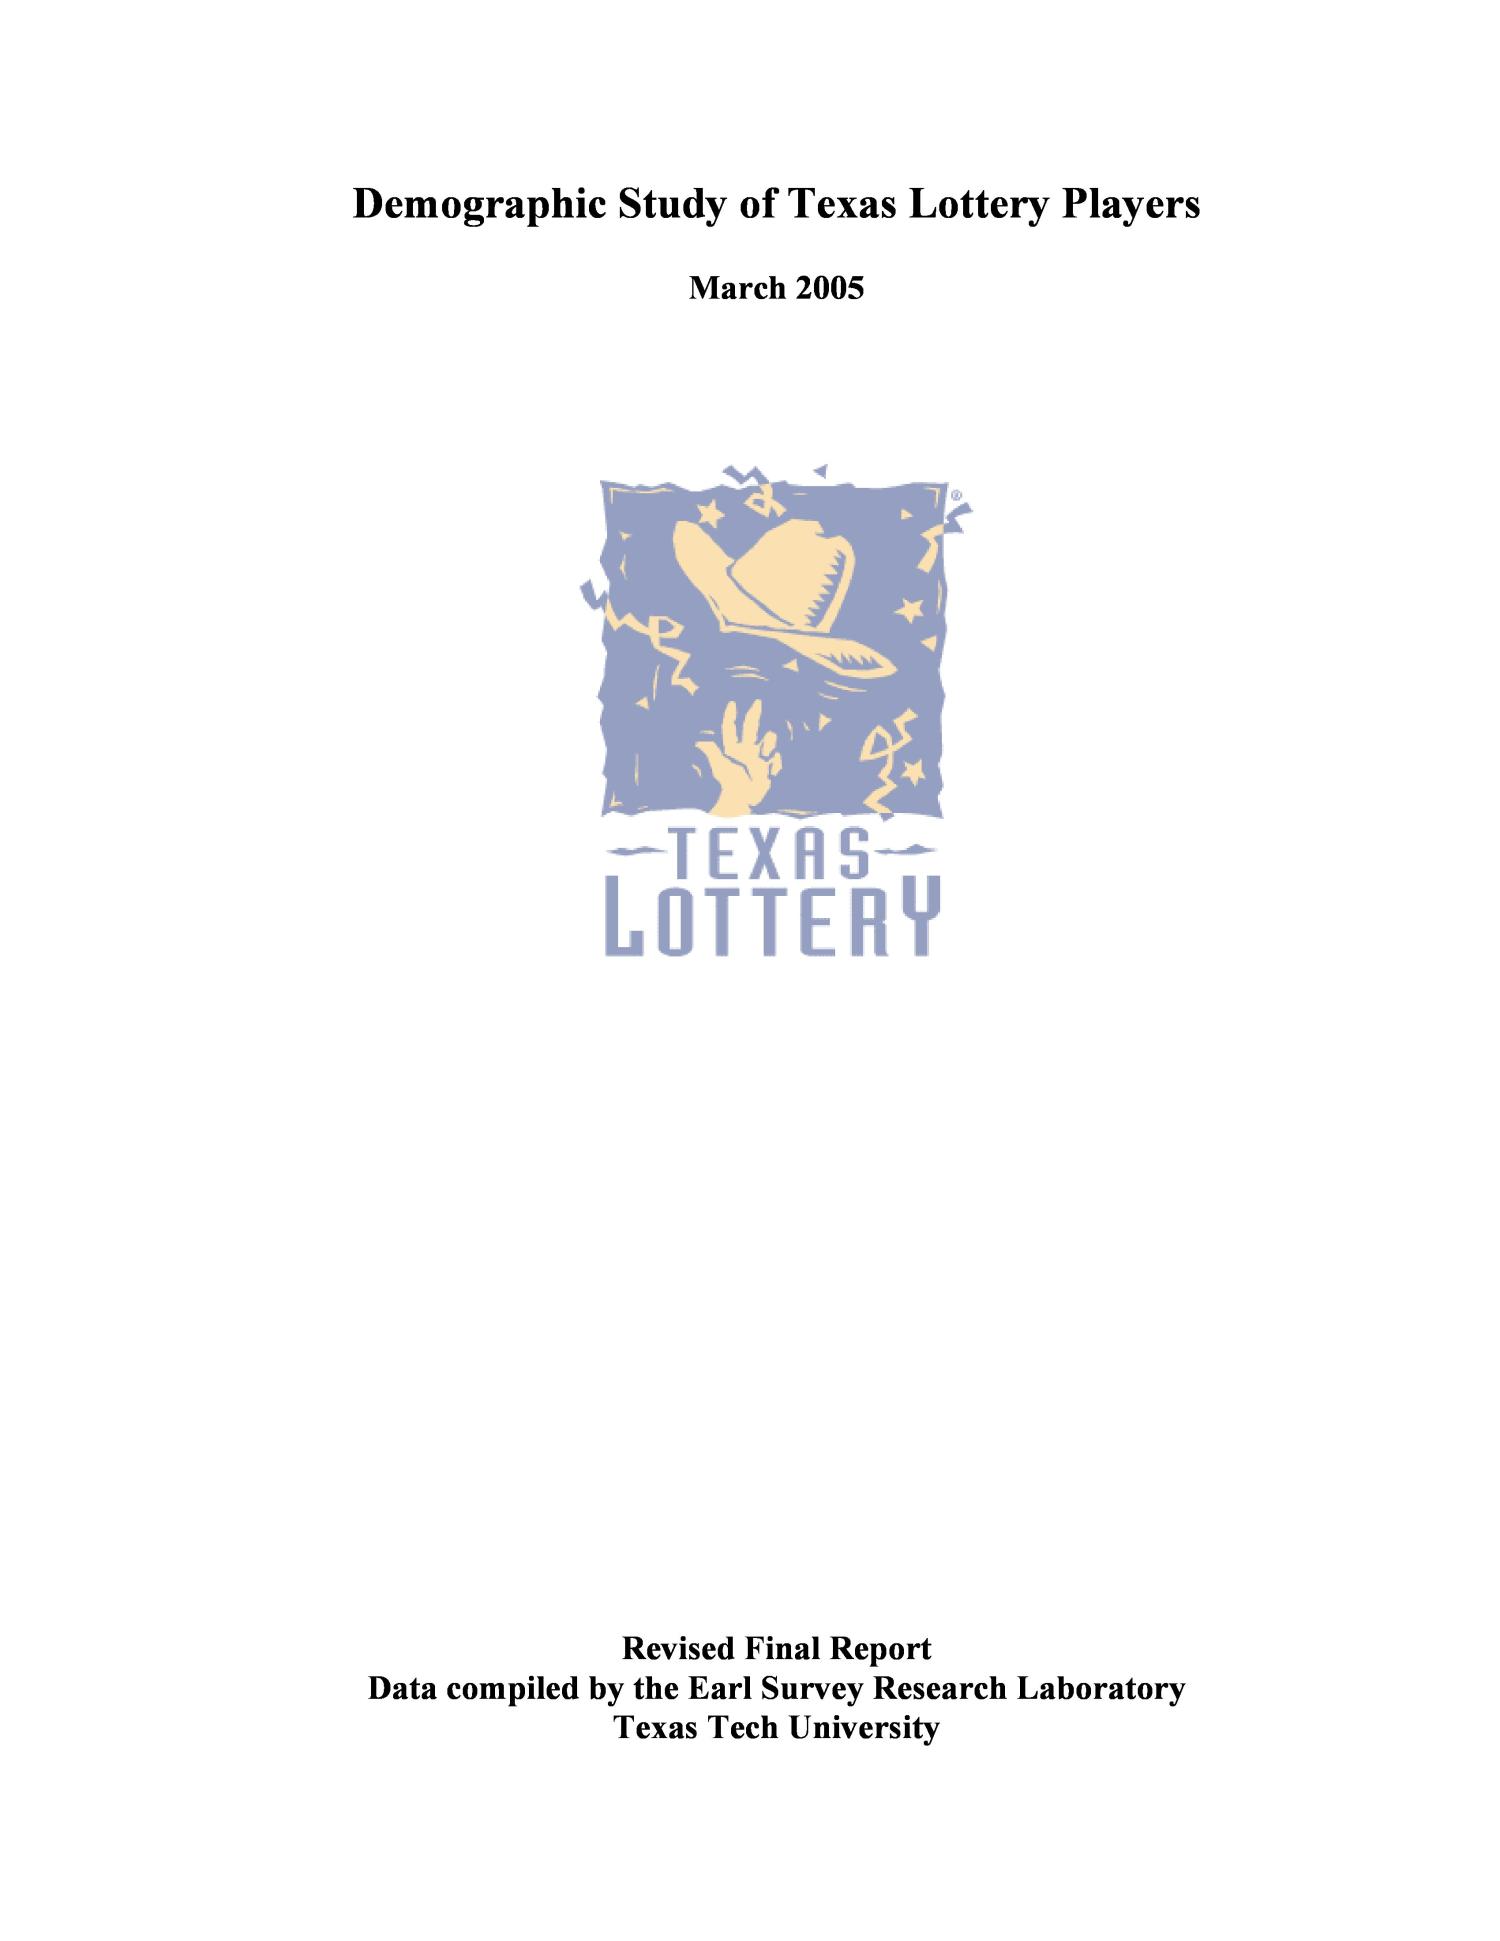 Demographic Study of Texas Lottery Players: 2004
                                                
                                                    1
                                                